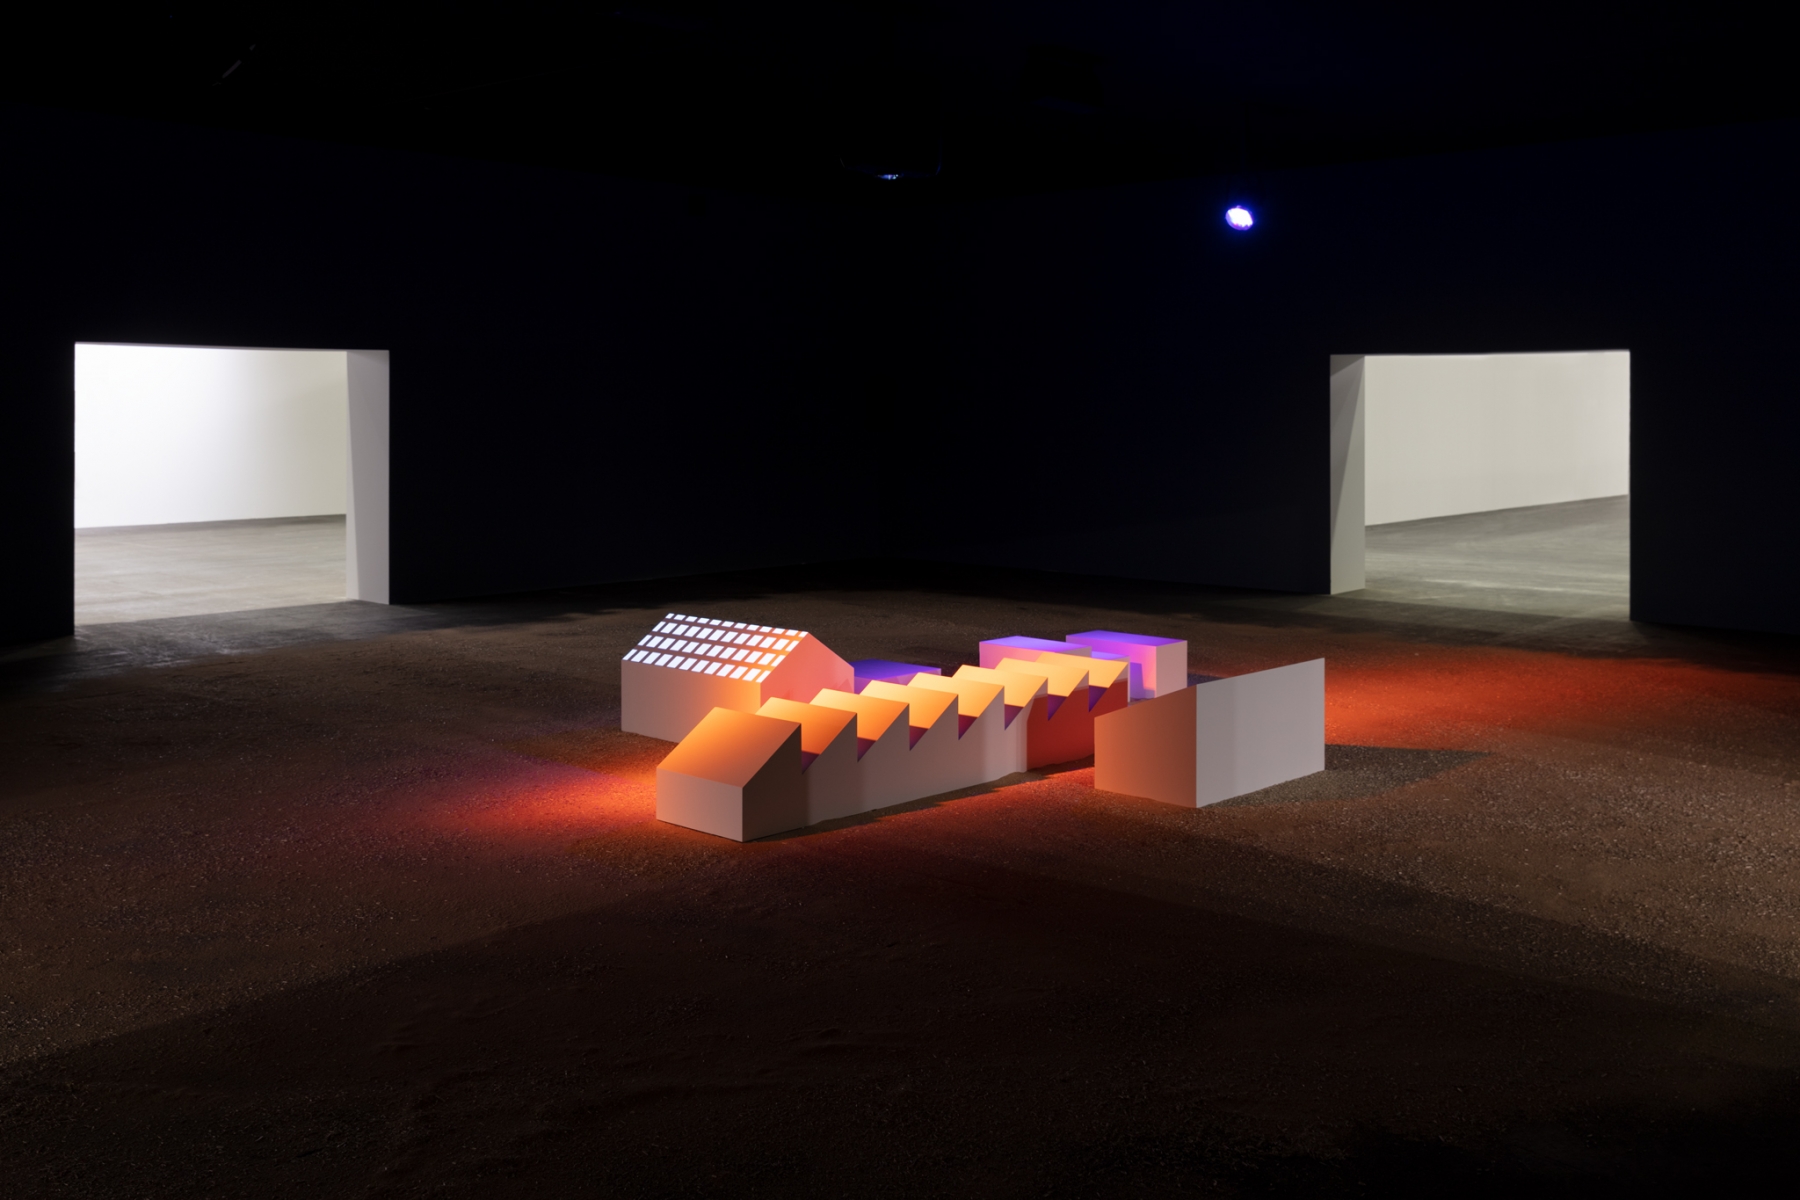 Liam Gillick
The Lights are no Brighter at the Centre, 2017 Painted MDF, theatre lights, HD projection, sawdust
Duration projection cycle: 09:21 min
Overall dimensions variable
Booth view: Art Basel Unlimited, Basel, 2021
Photo &copy; Andrea Rossetti